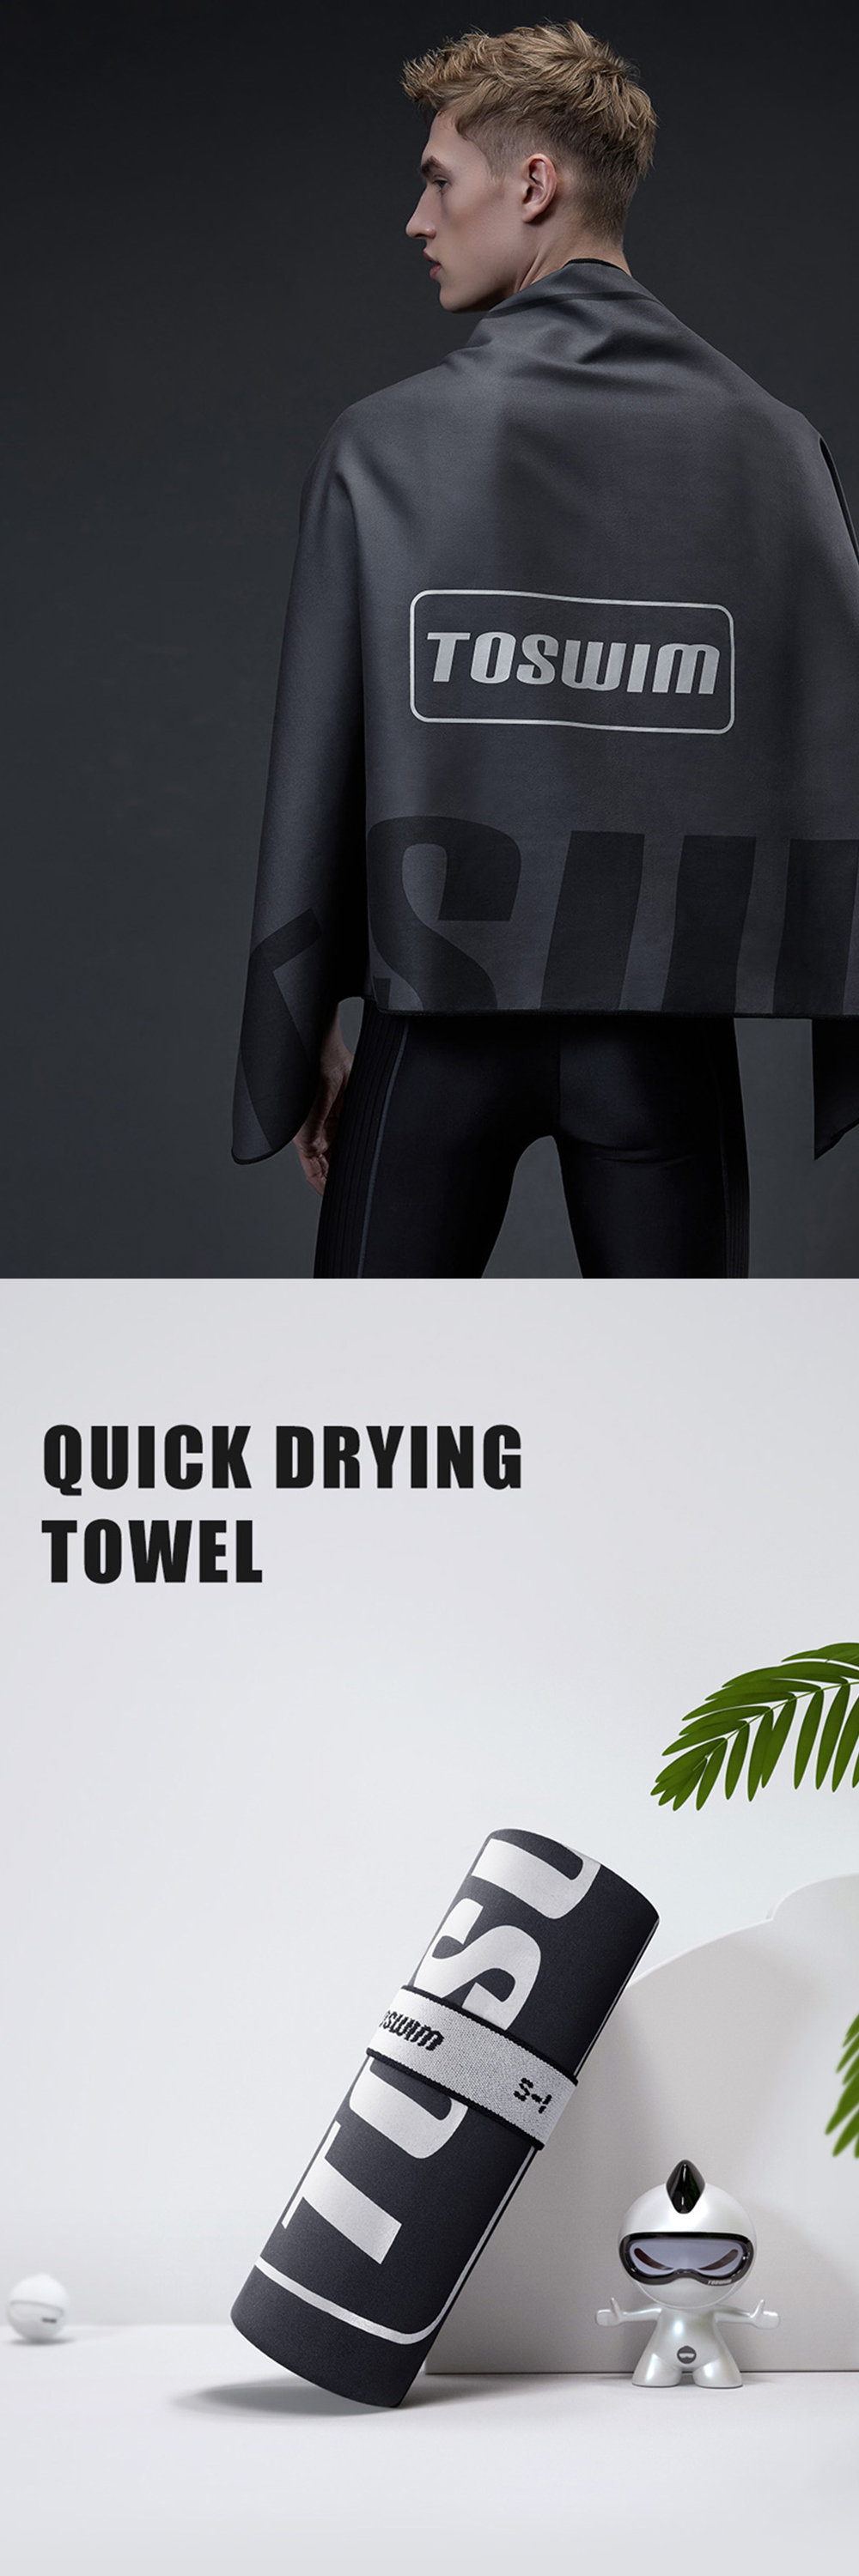 Sports Absorbent Towel - Quick Drying - Polyester and Nylon from Apollo Box